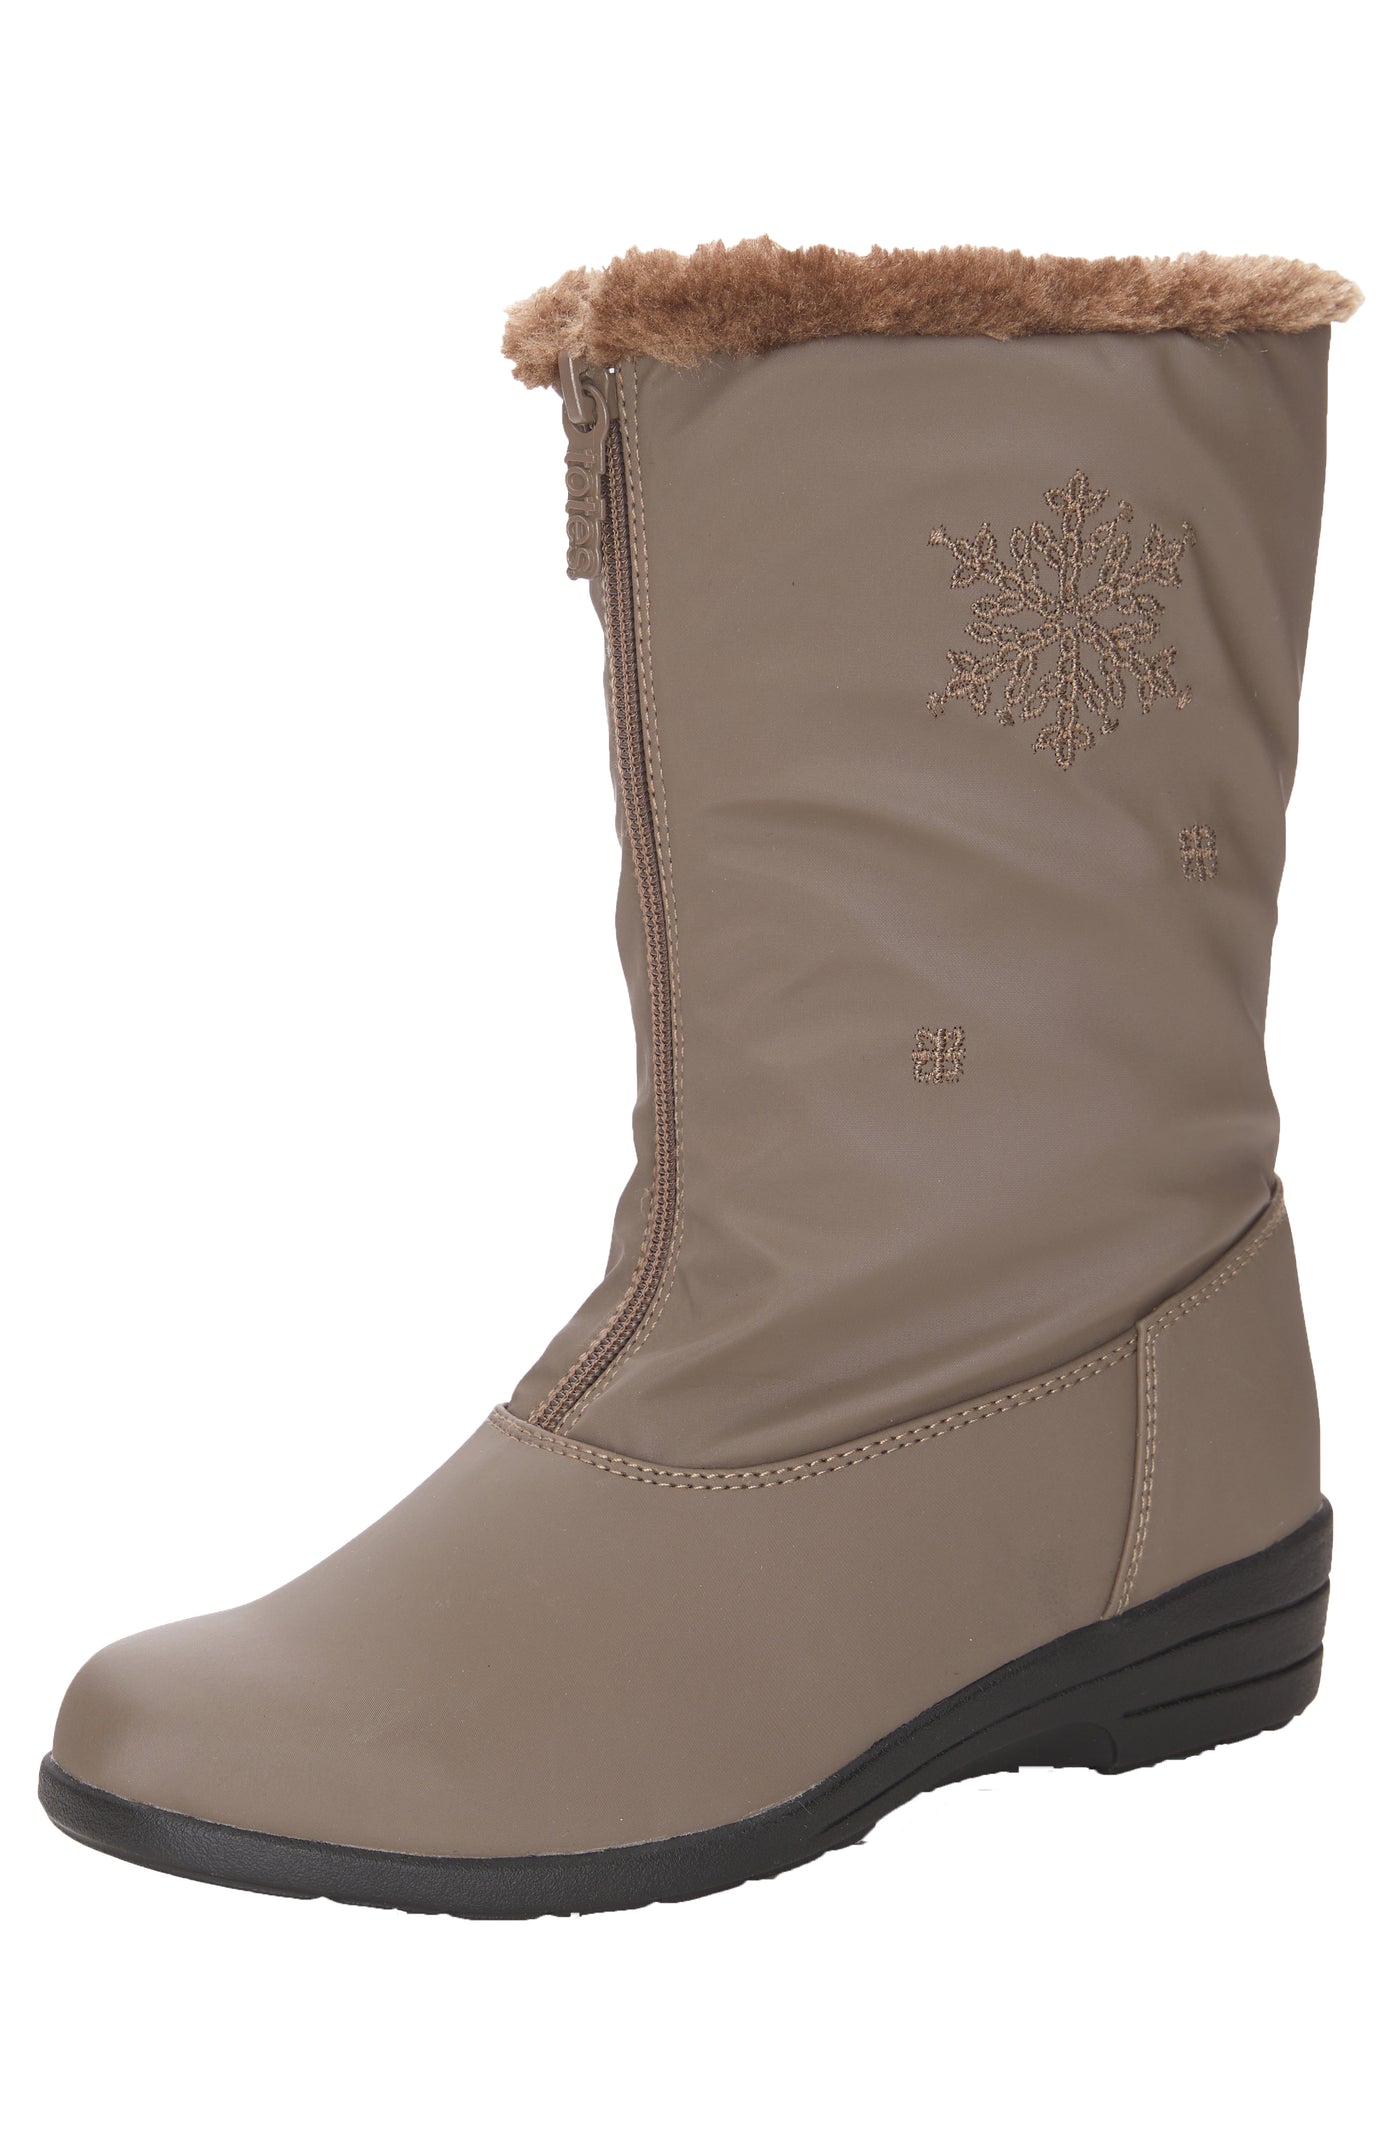 Totes Womens Nicole Cold Weather Waterproof Boots